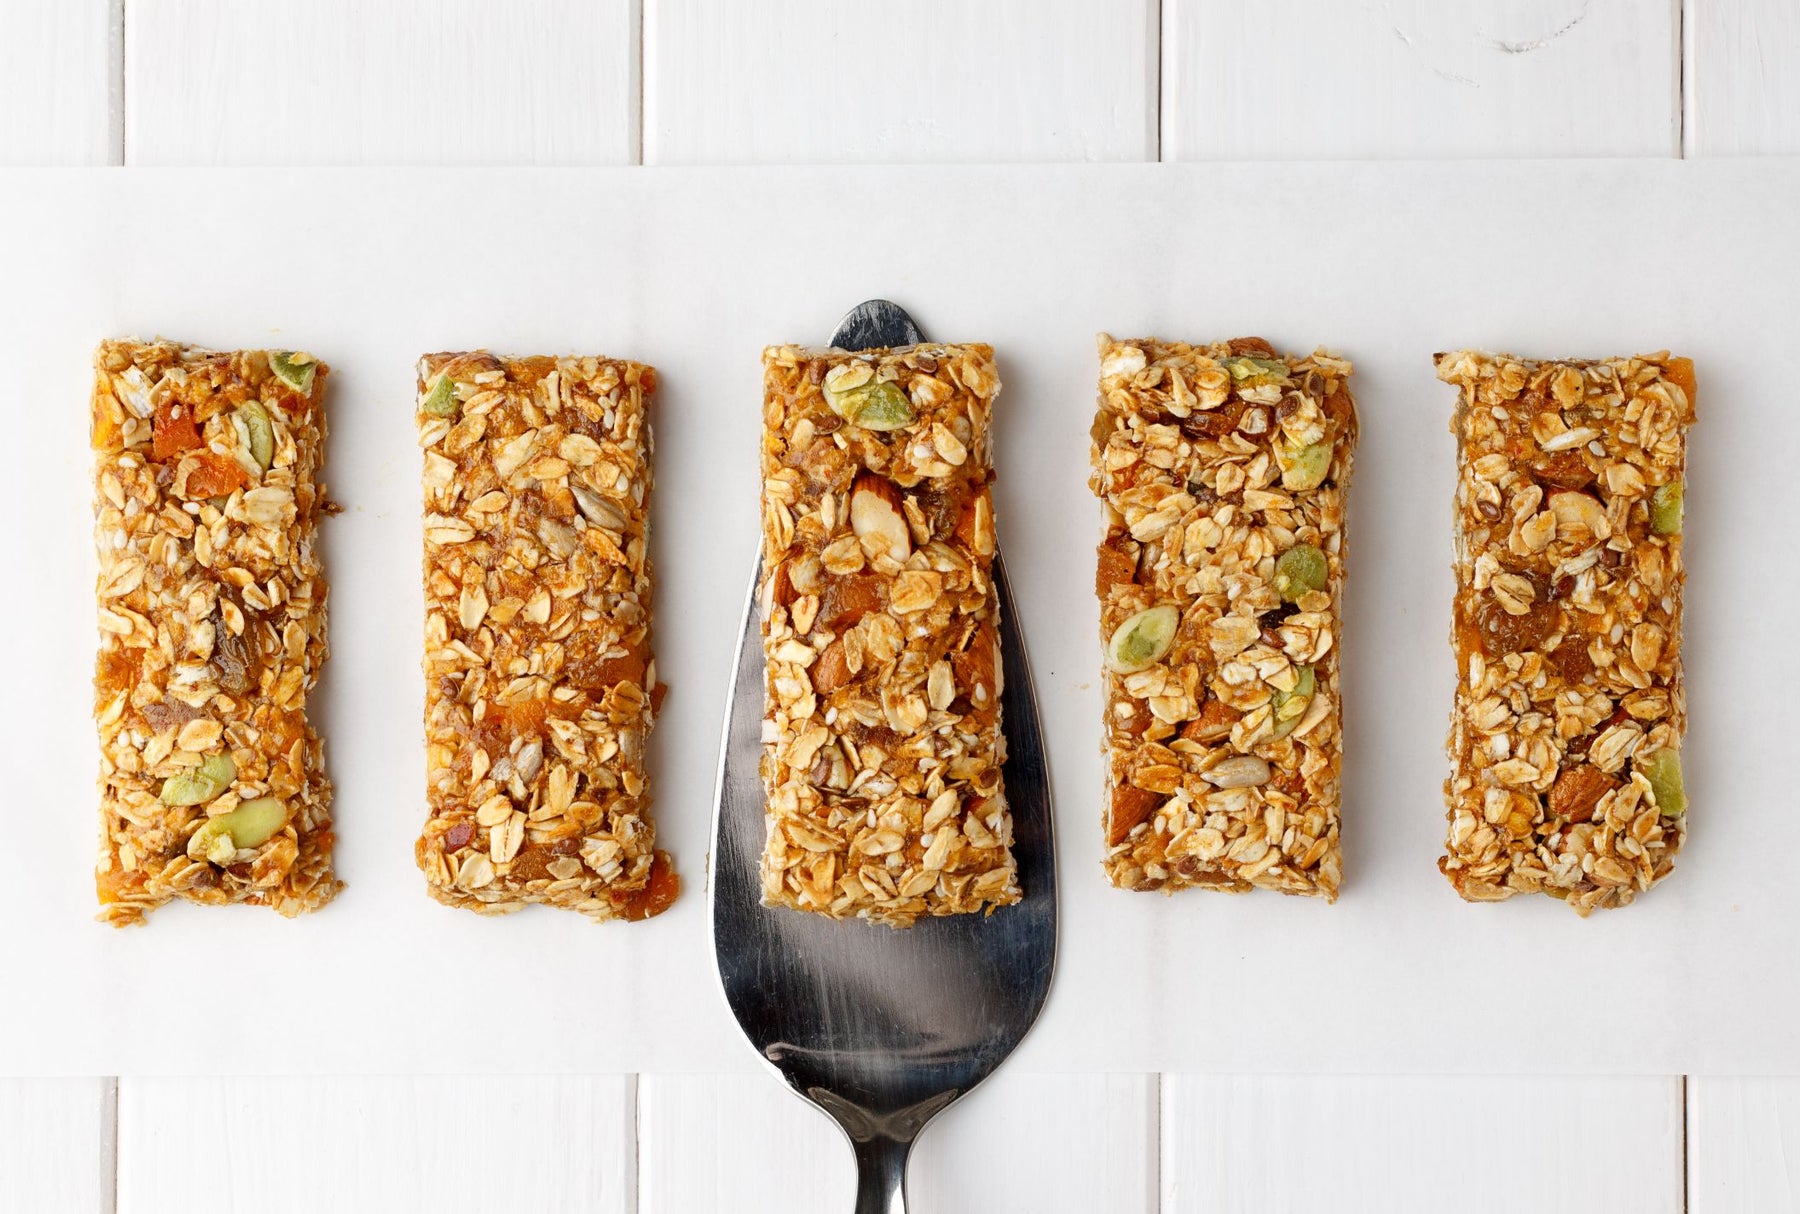 Peanut Butter and Chocolate Chip Granola Bars with Organic Sun-Dried Apricots (8 bars)